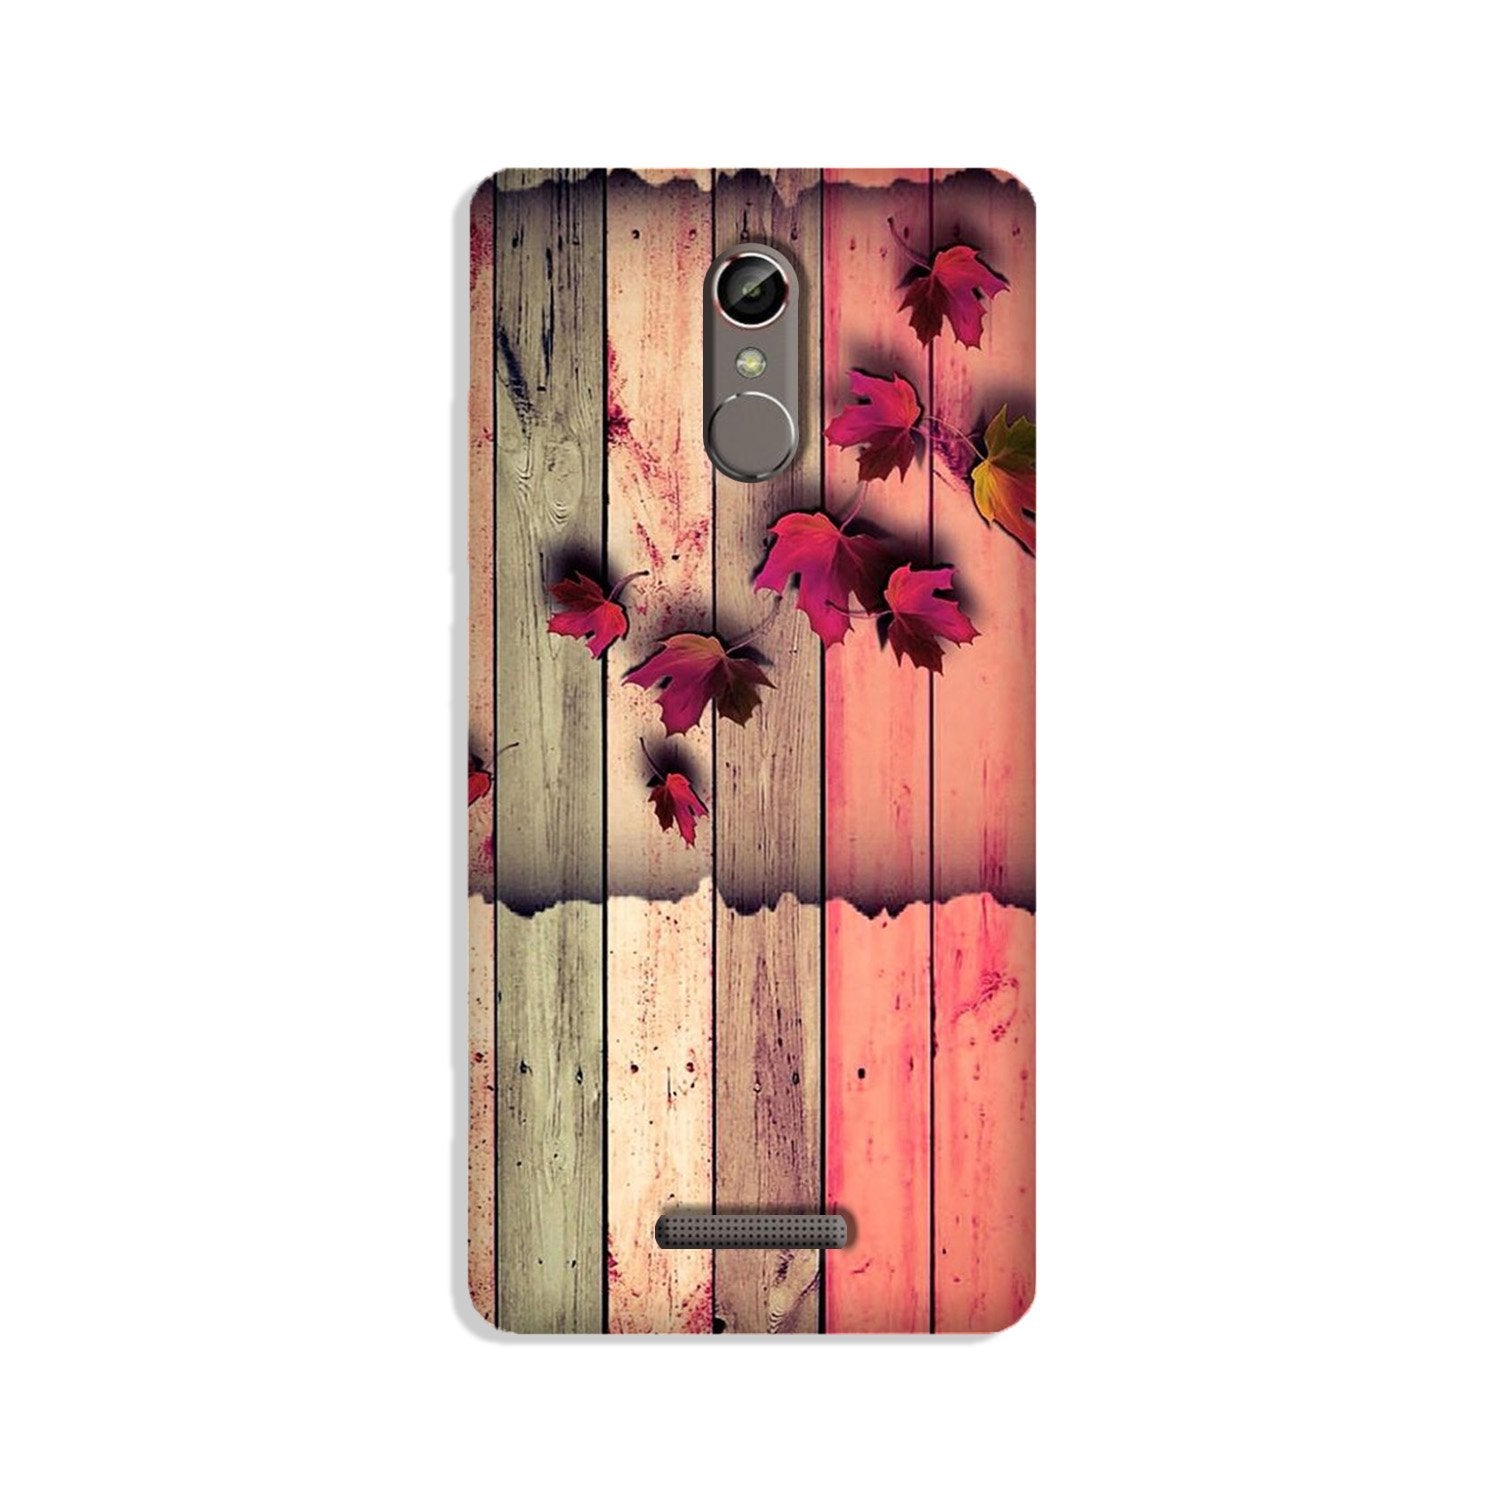 Wooden look2 Case for Gionee S6s